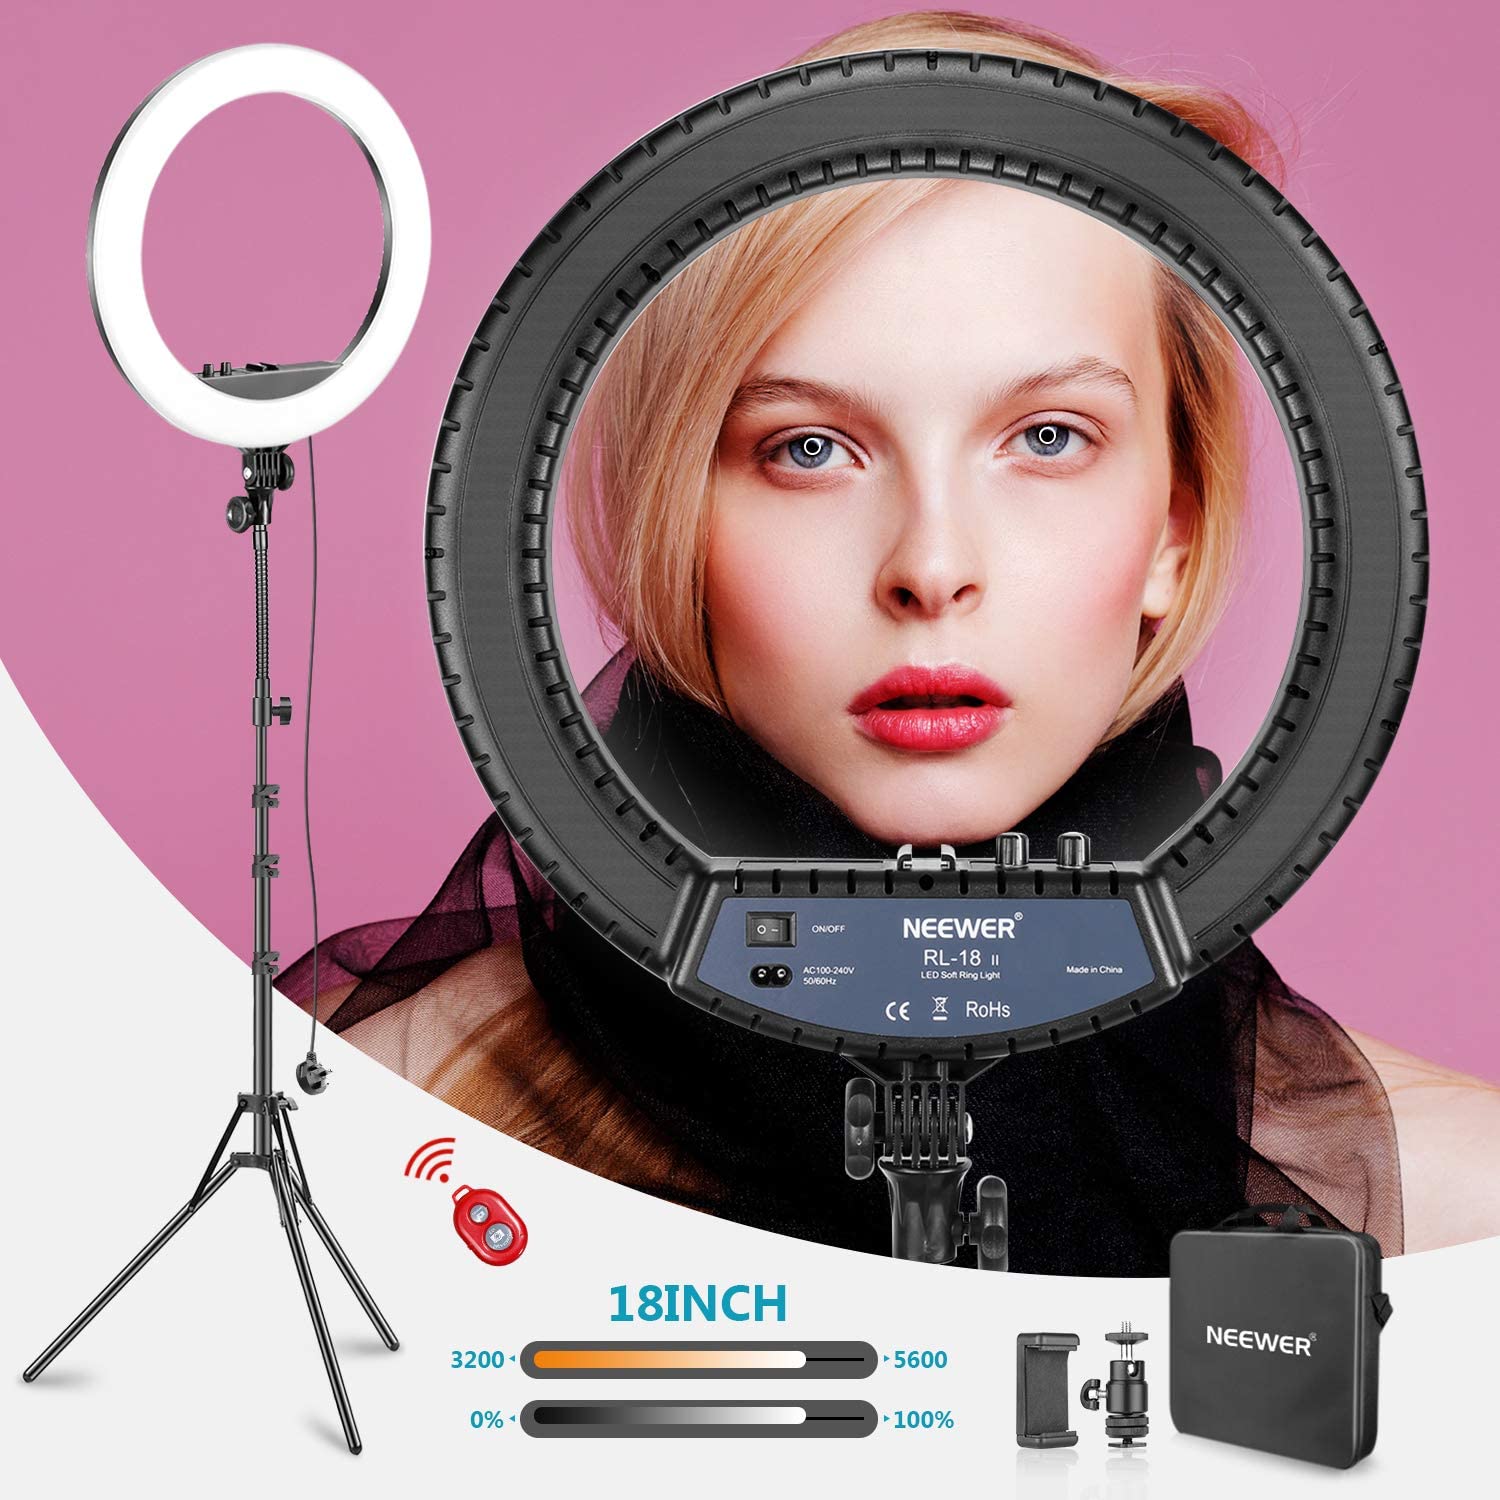 Neewer 14-inch Outer Dimmable Bi-Color LED Ring Light 30W 3200k-5600K Small  Ring Light For Photo Portrait Photography, Make Up,  Video Shooting